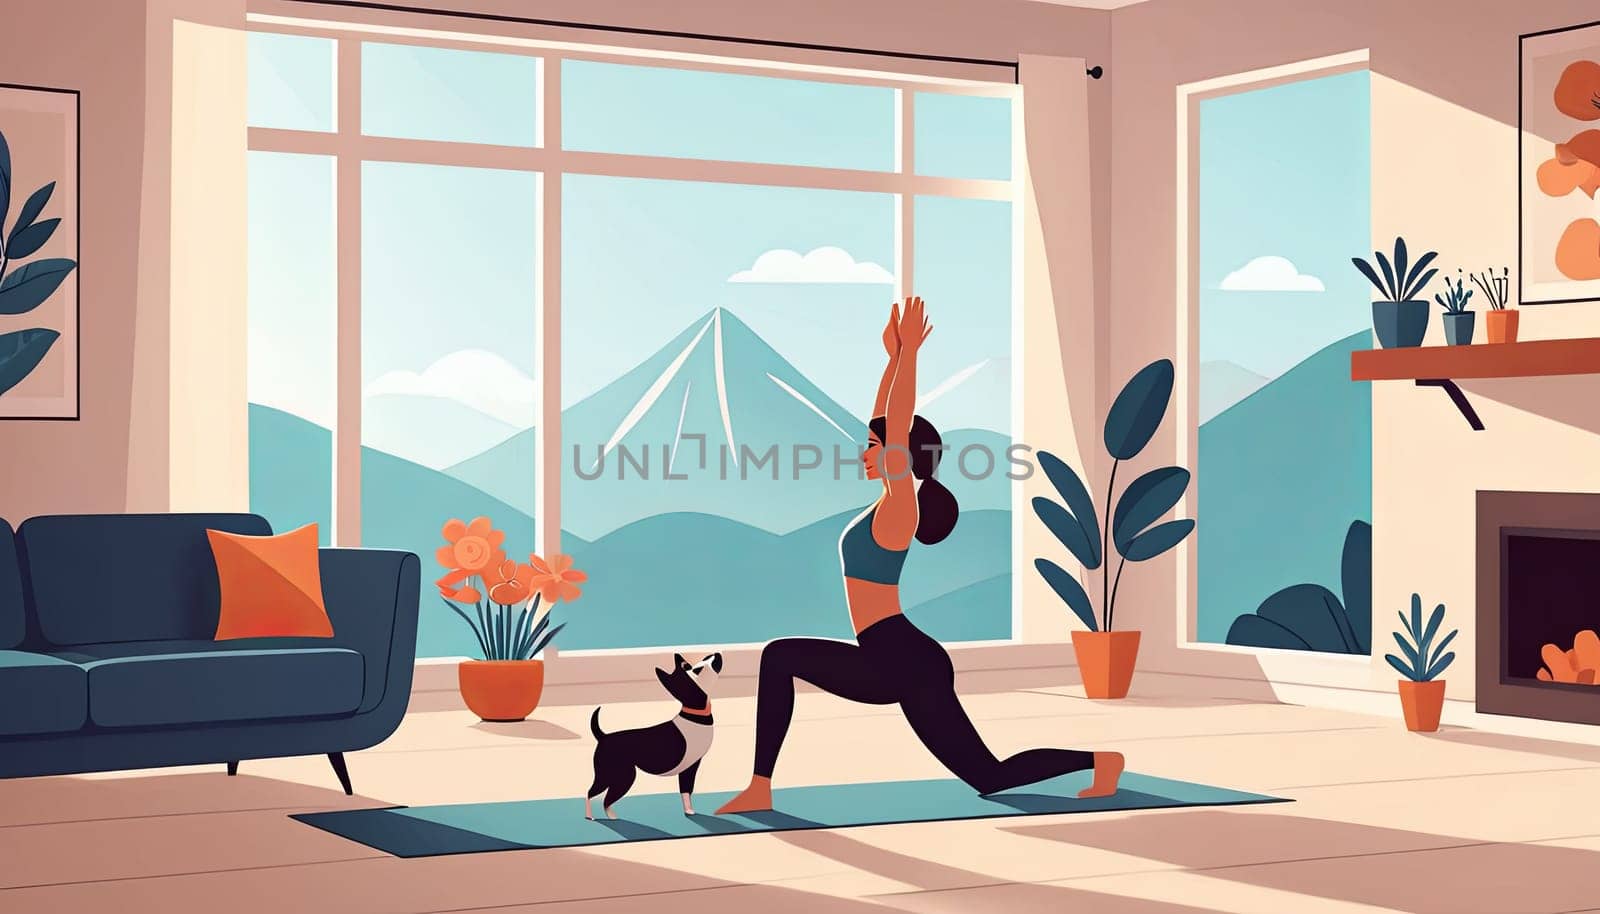 Woman practices yoga, dog nearby, home setting. Cartoon style, lifestyle depiction, interior scene. Meditation and sport emphasized. by Matiunina